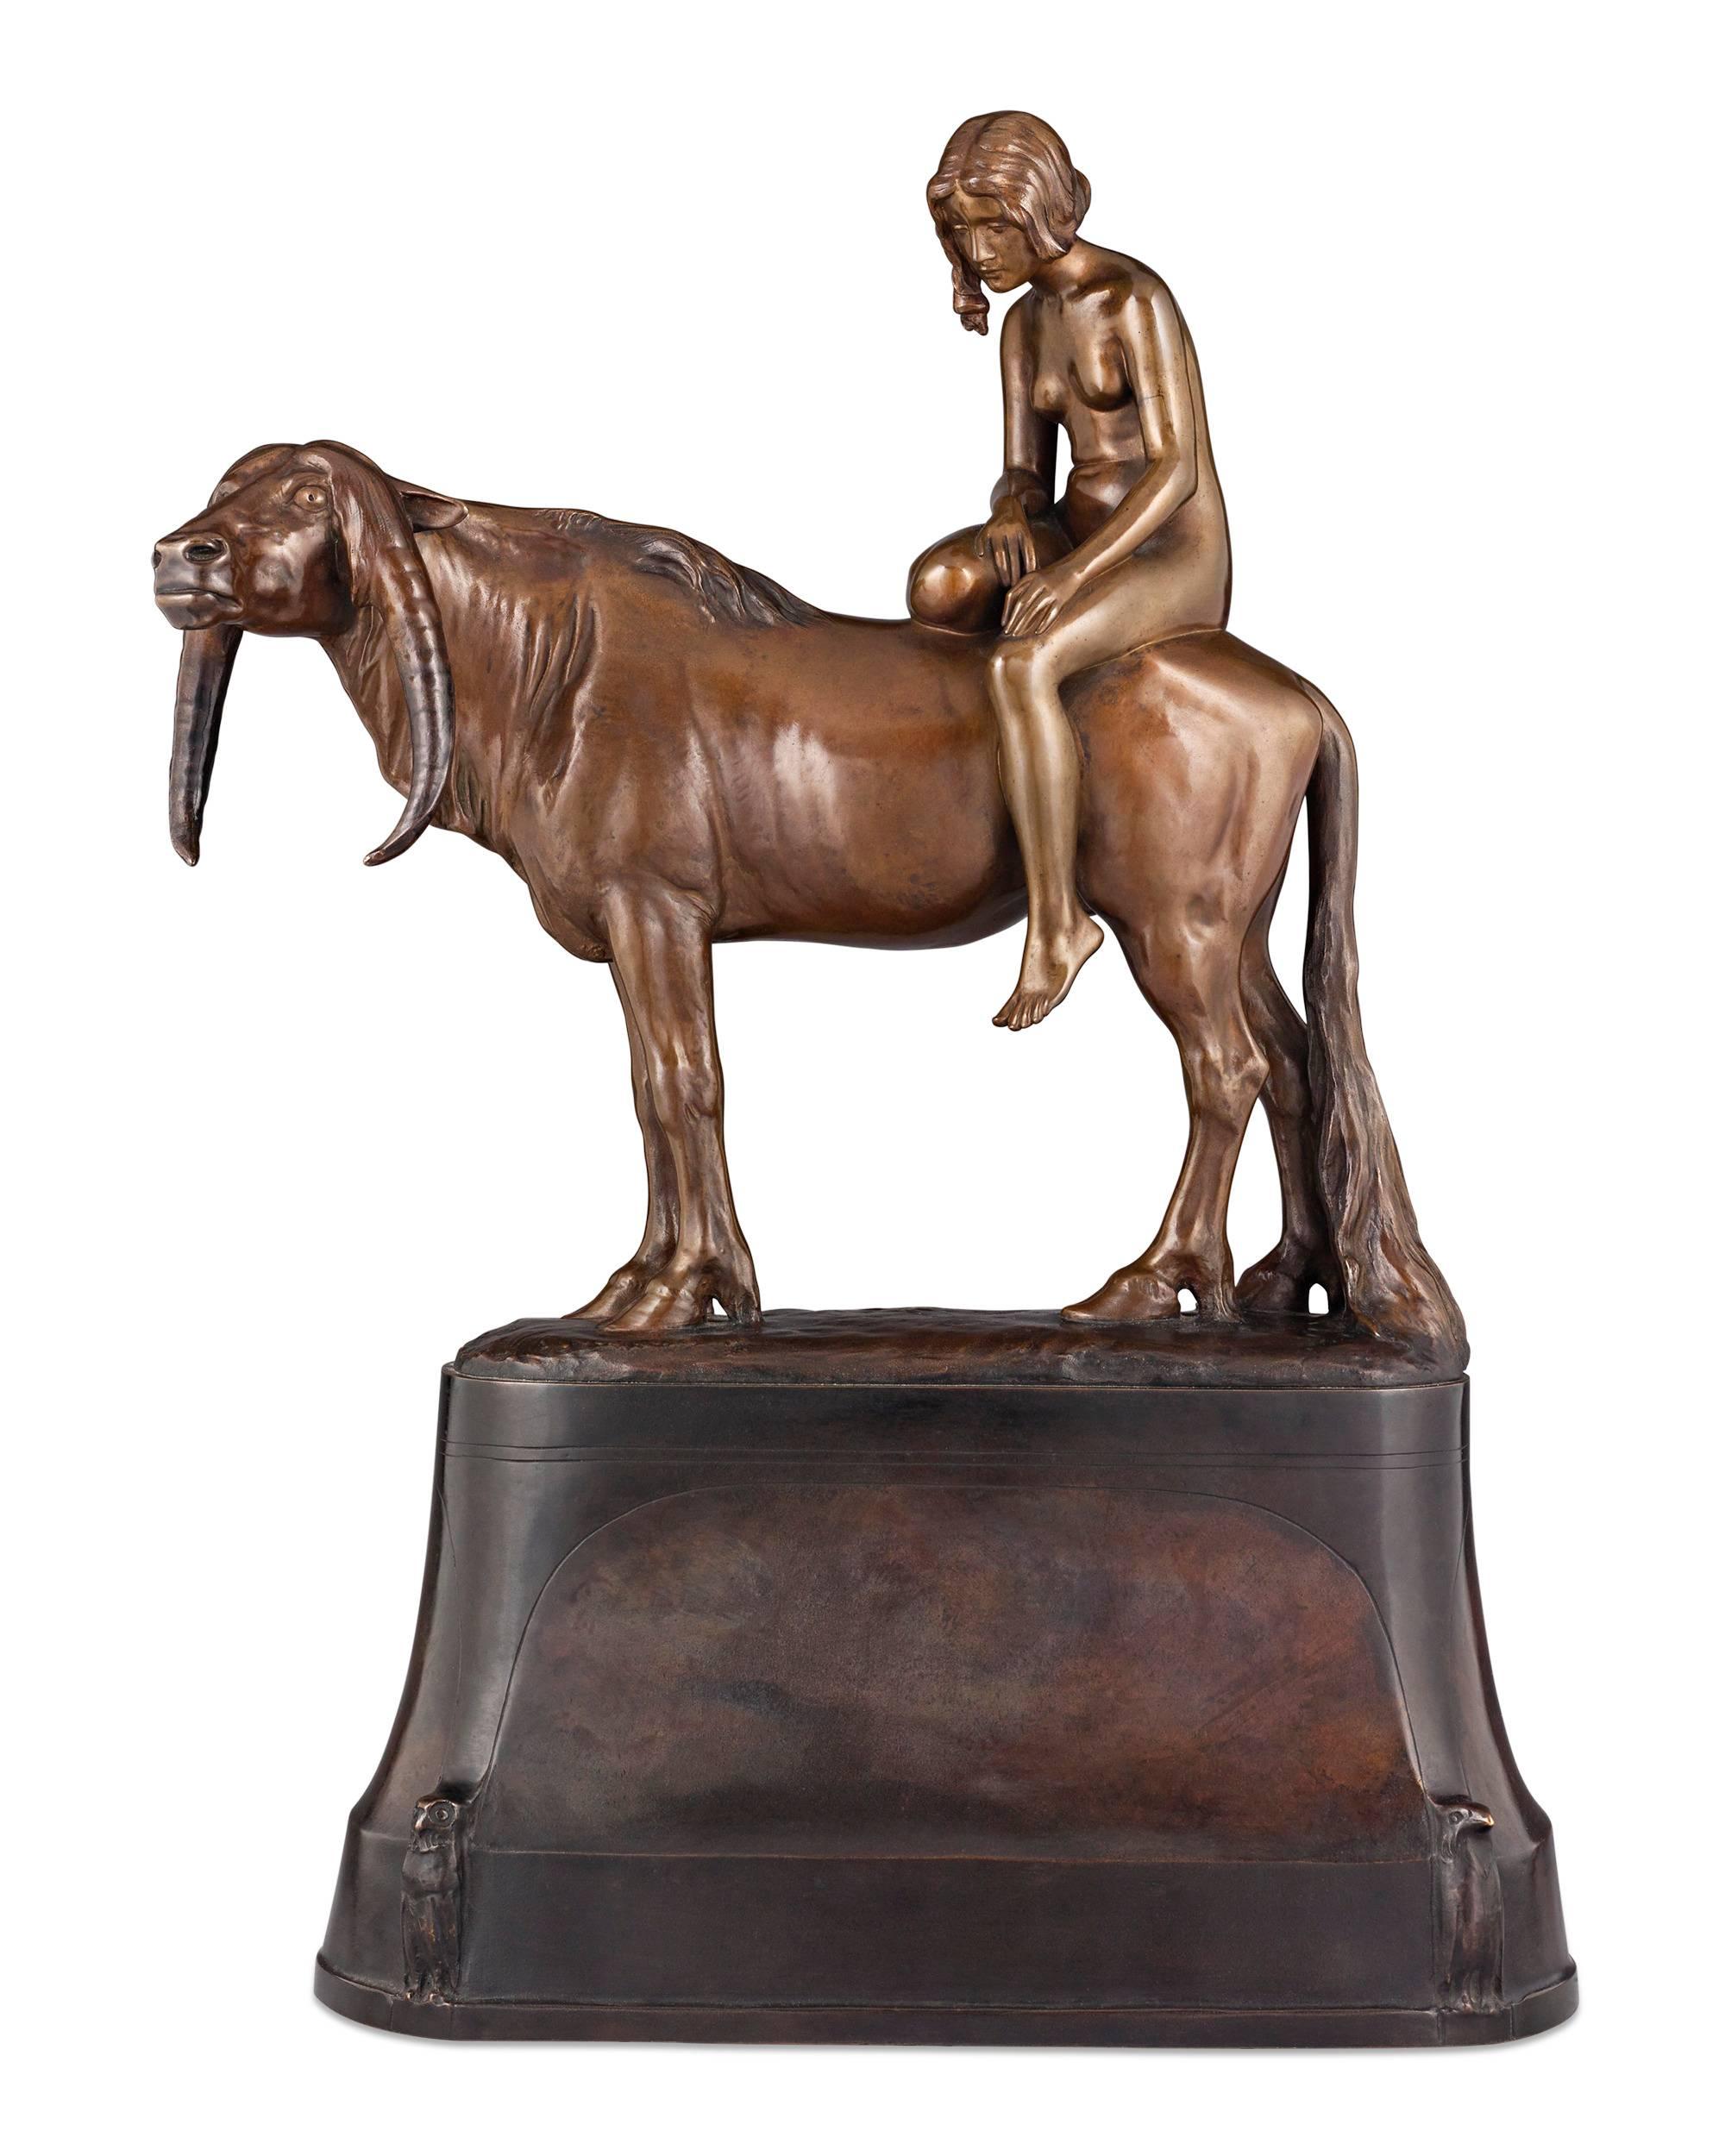 A poignant work of extraordinary artistry, this bronze figure captures the mythical tale of Europa, the beautiful Phoenician princess who was kidnapped by the king of the Olympian gods, Zeus. Among the most well-known stories from mythology and a